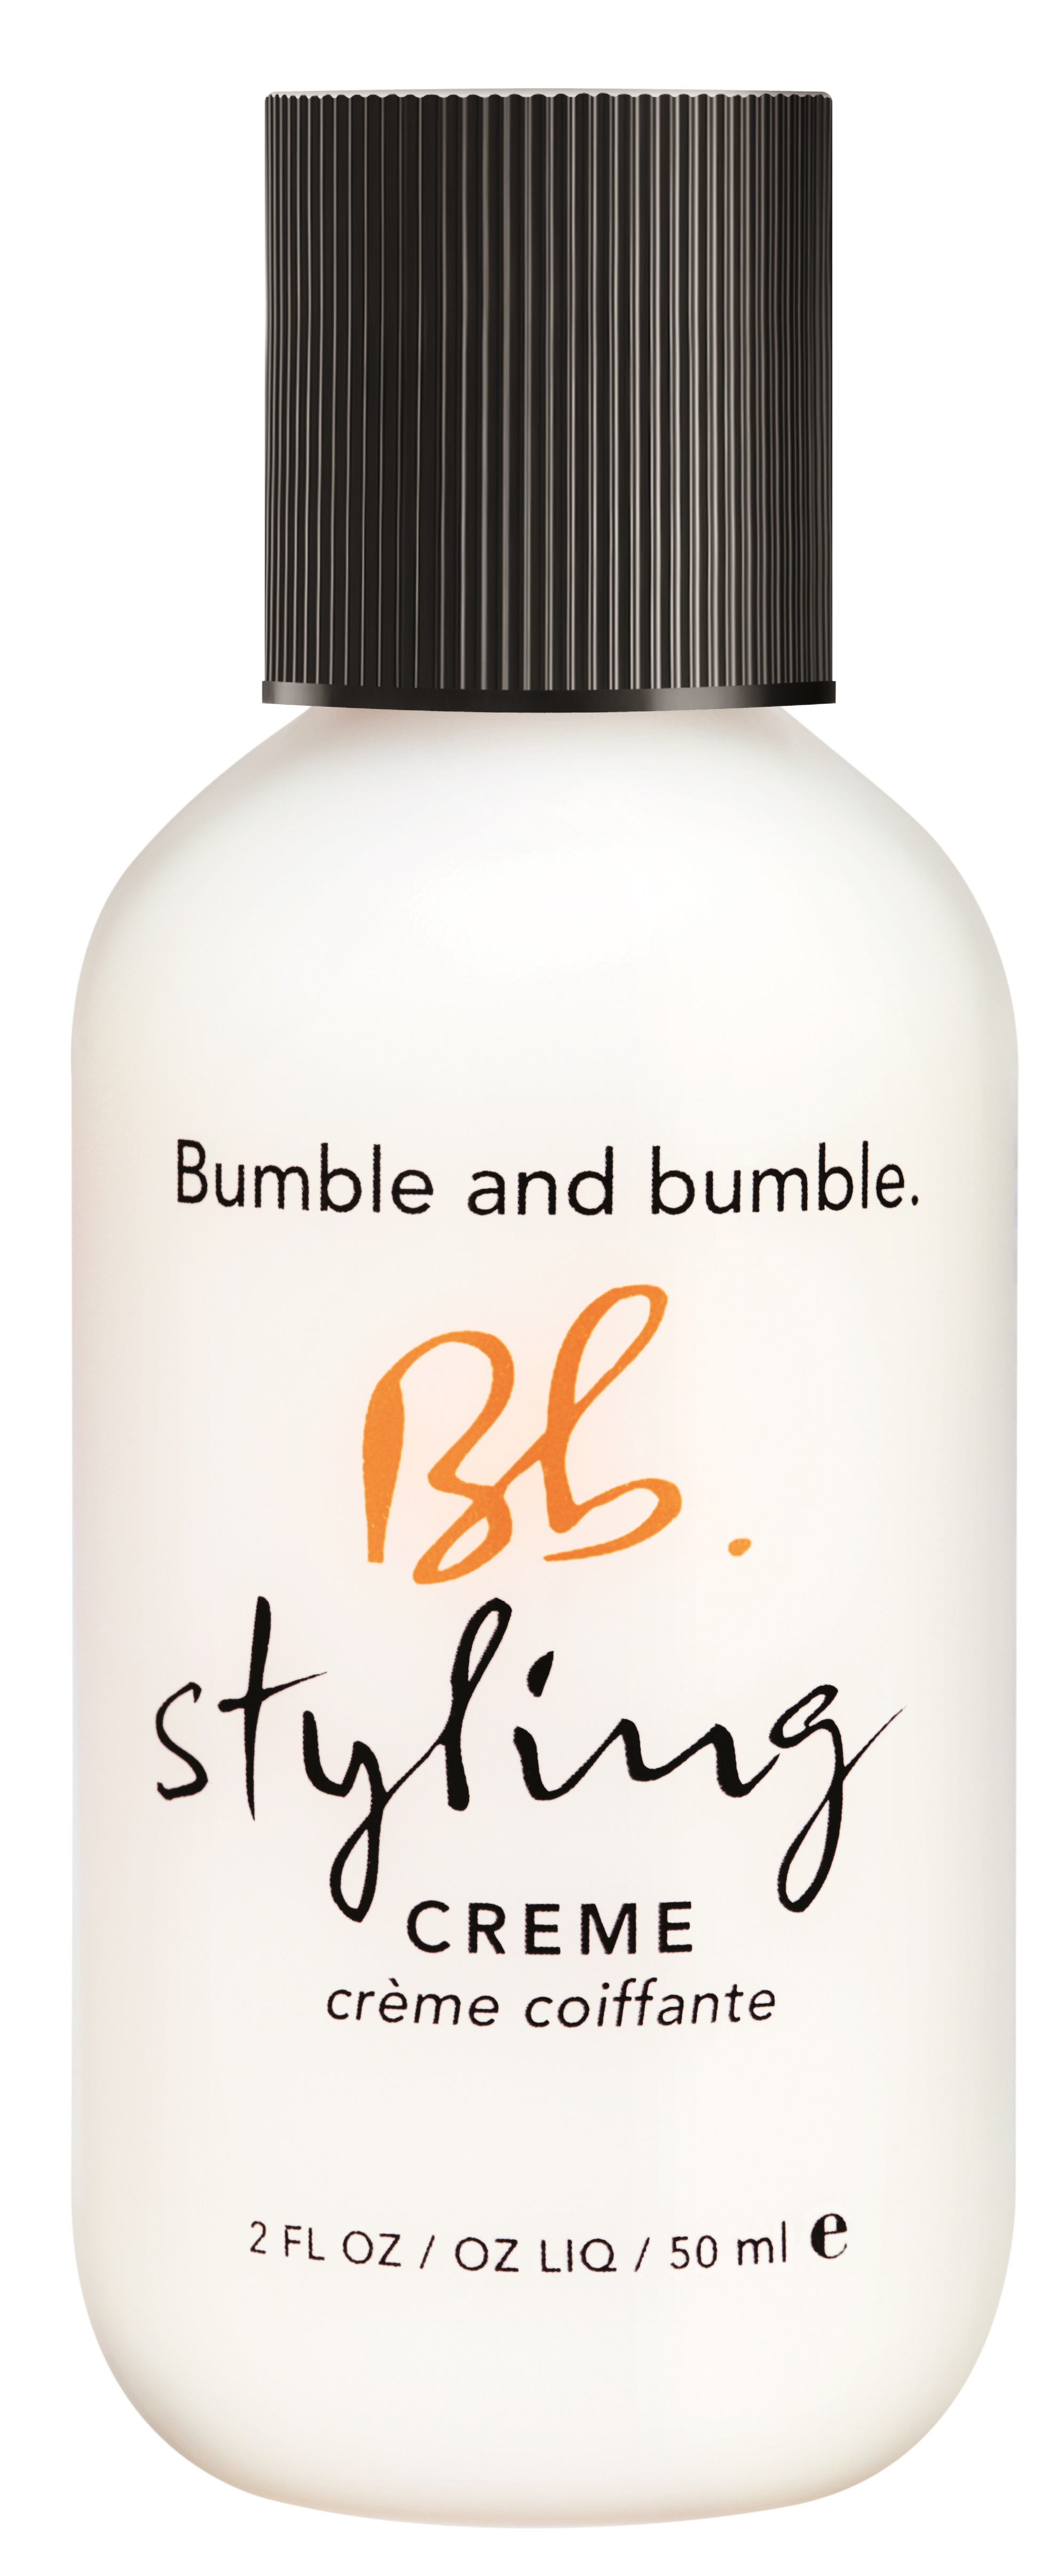 Bumble and bumble Styling Creme 50ml